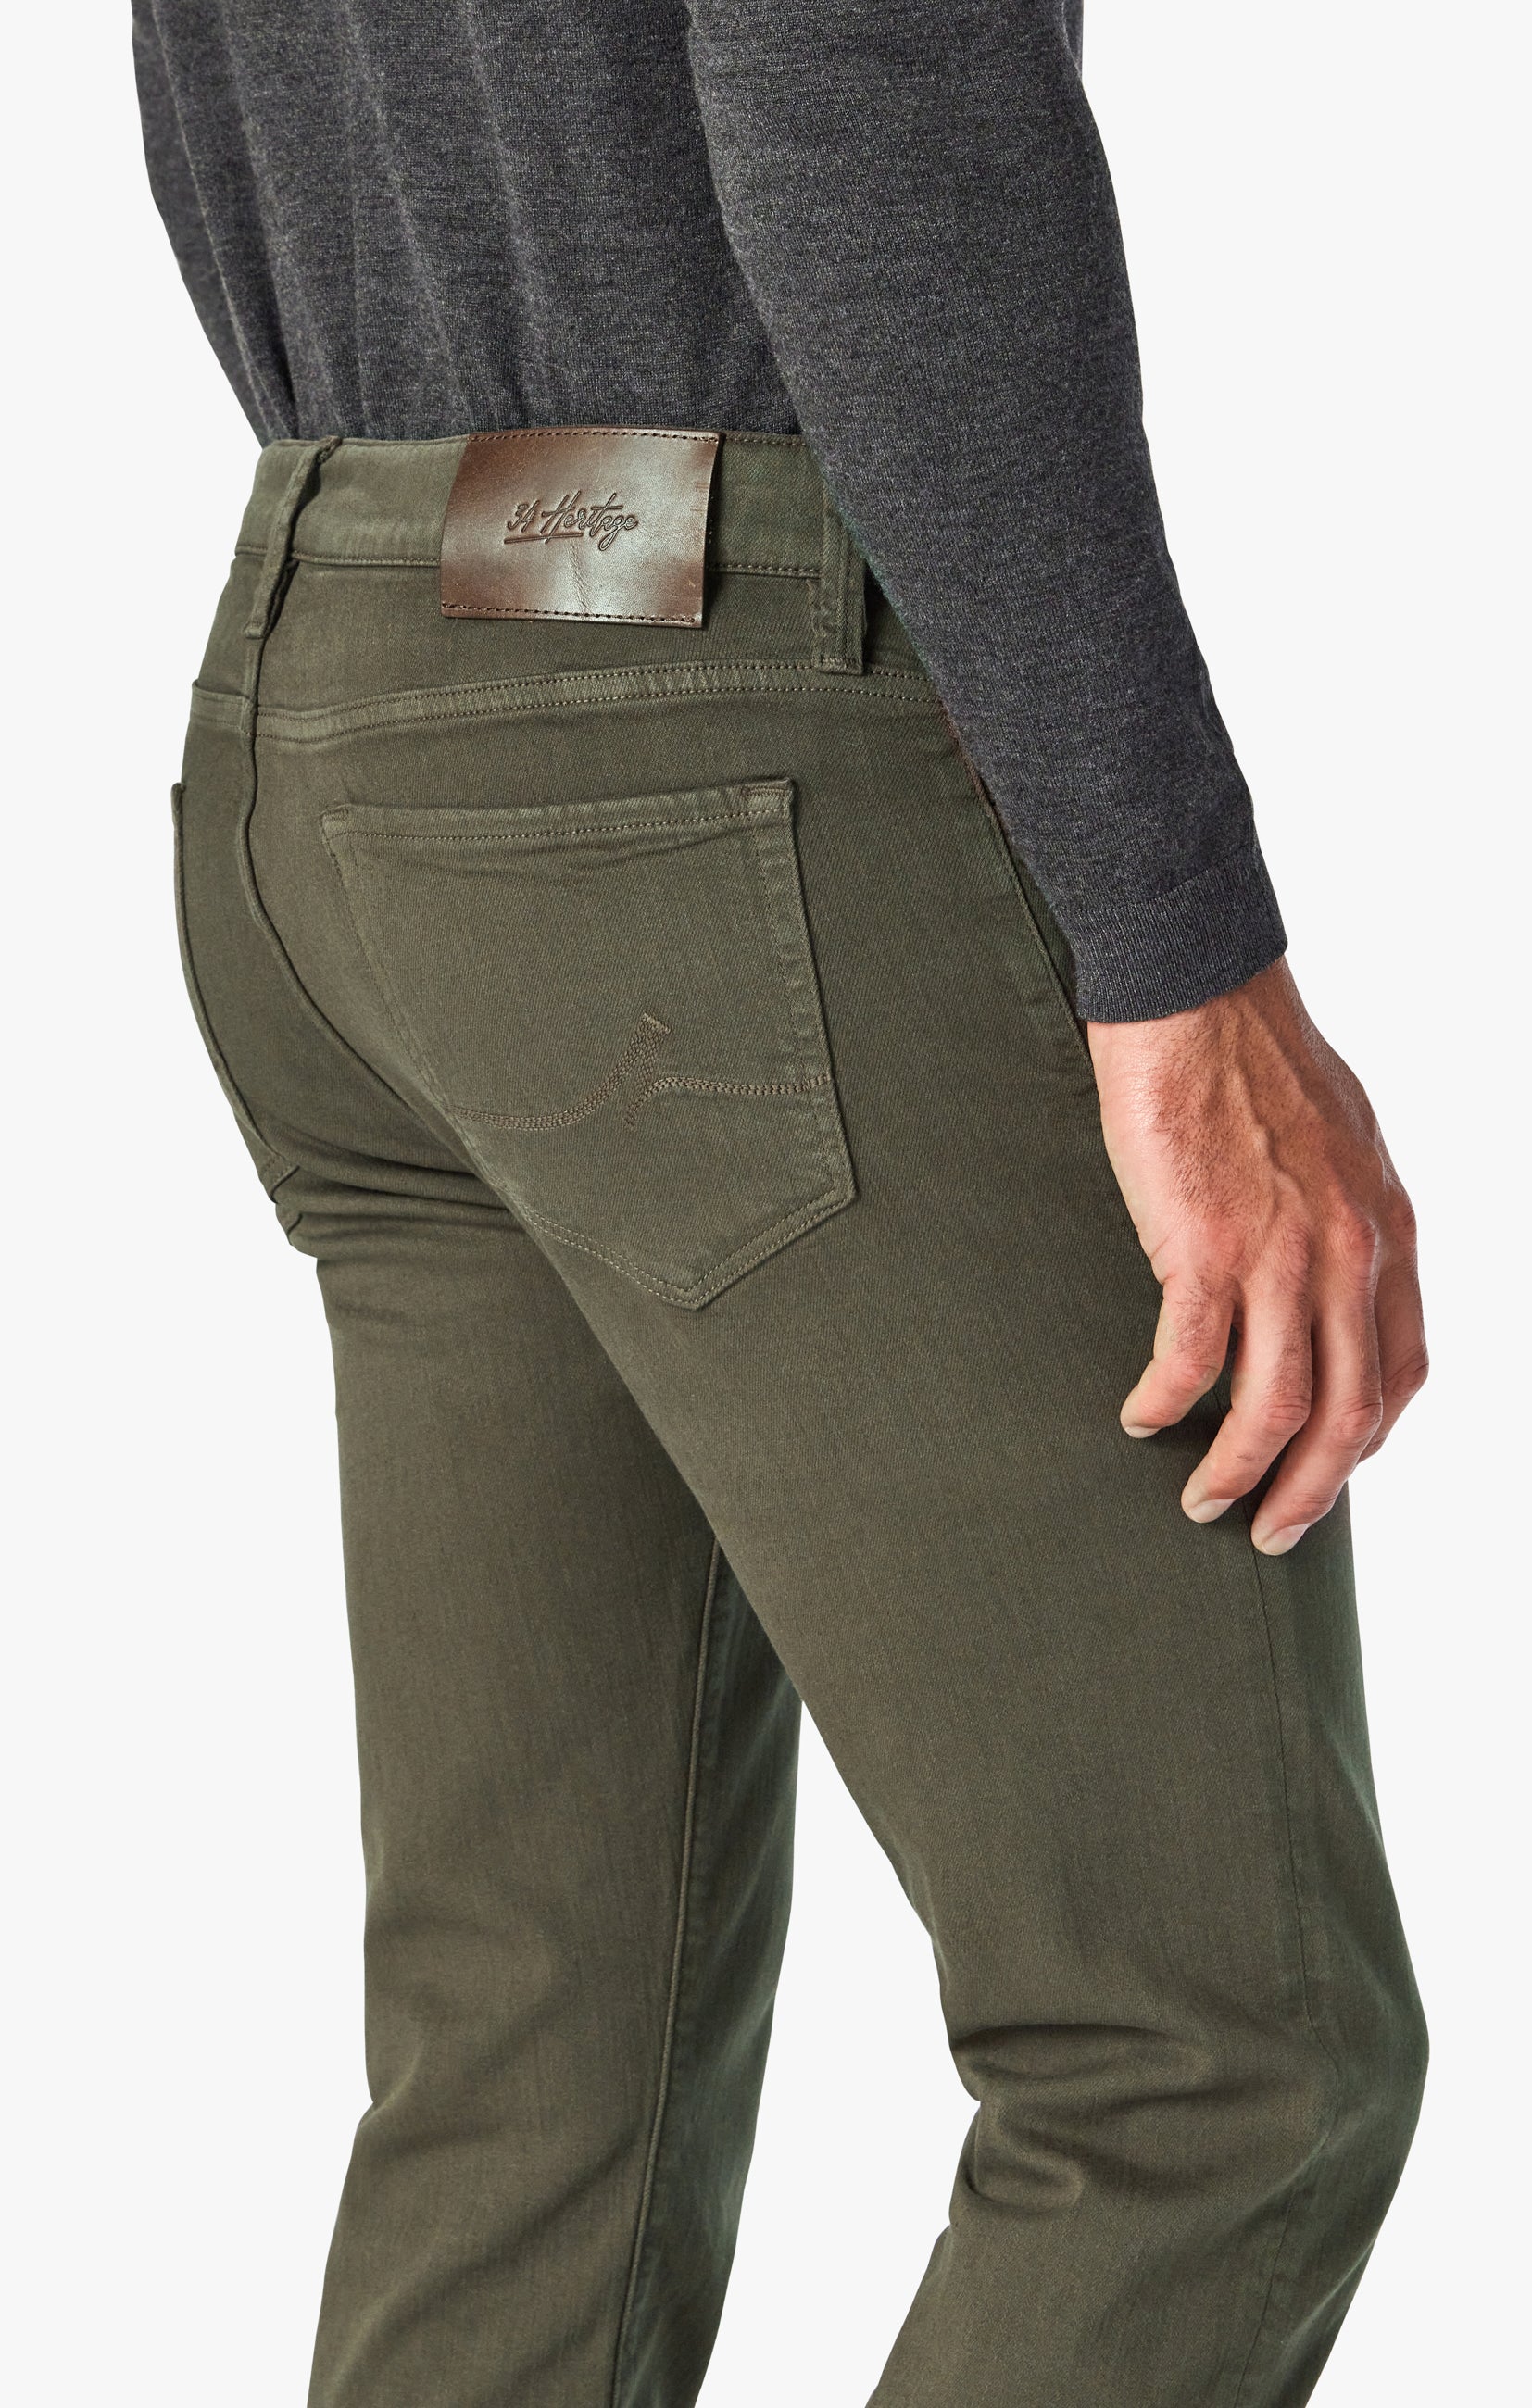 Charisma Classic Fit Pants in Green Comfort Image 4